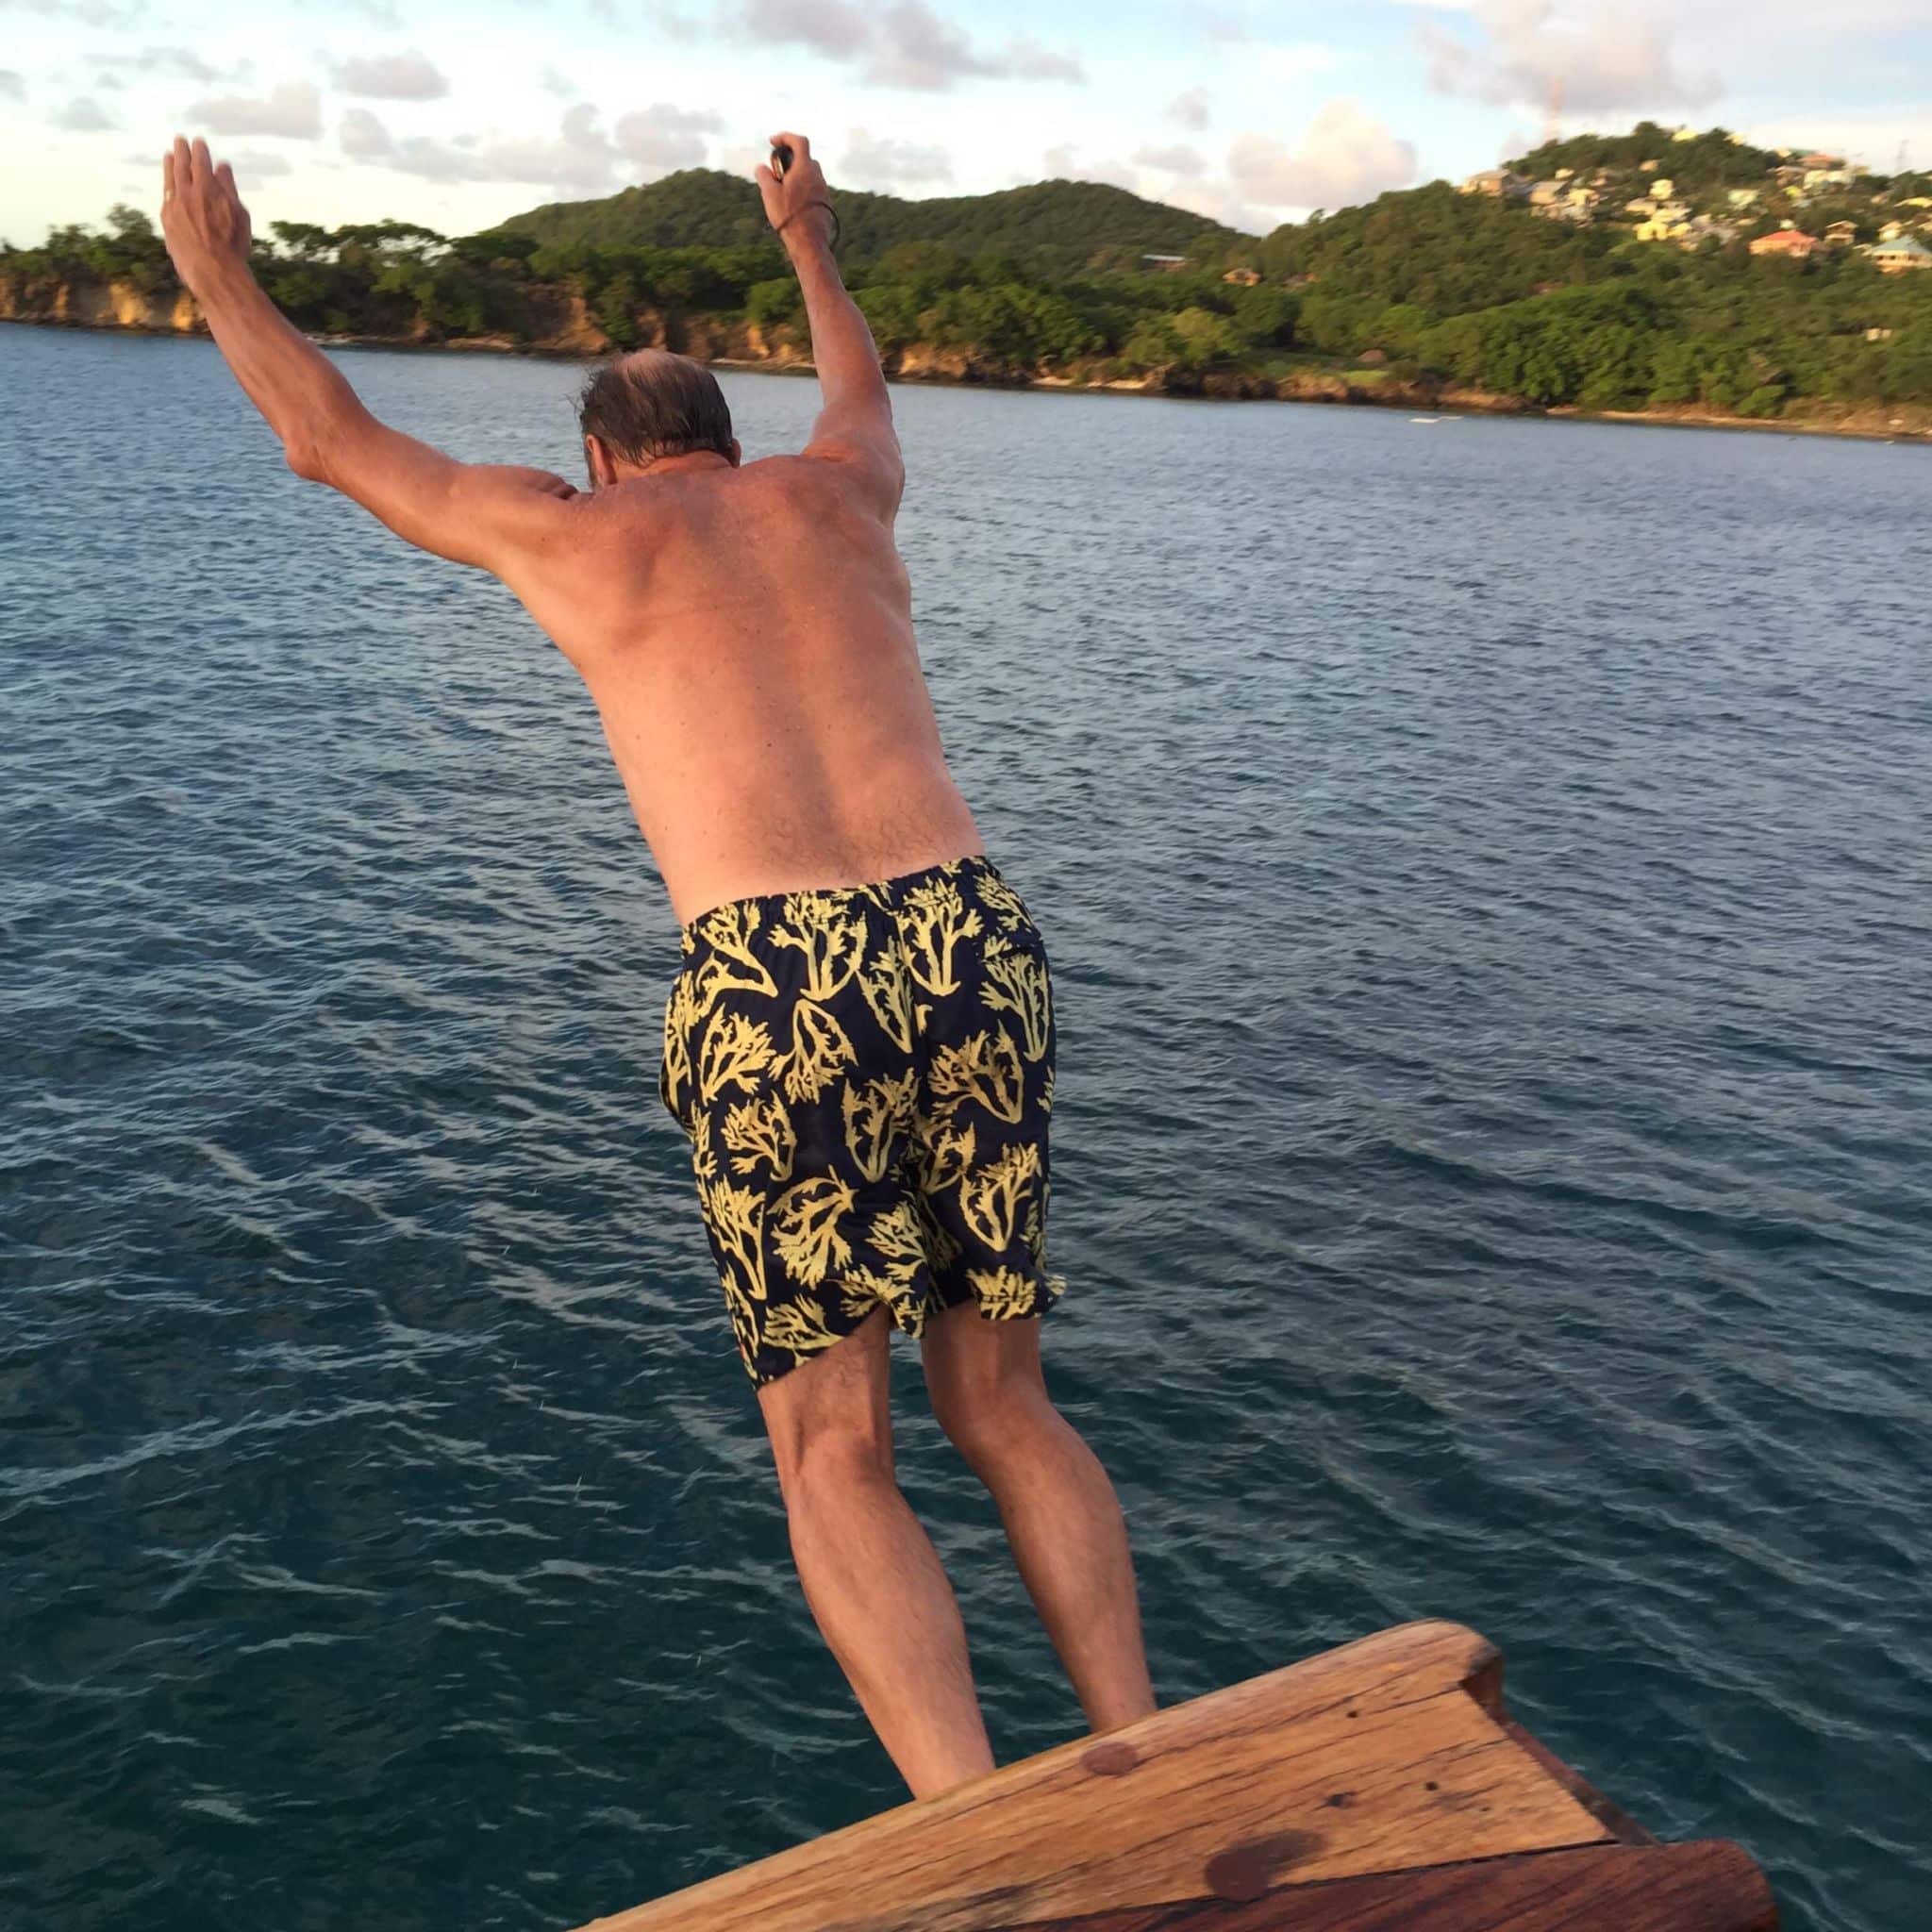 Leaping from the side of the ship for a swim is a highlight for many guests.